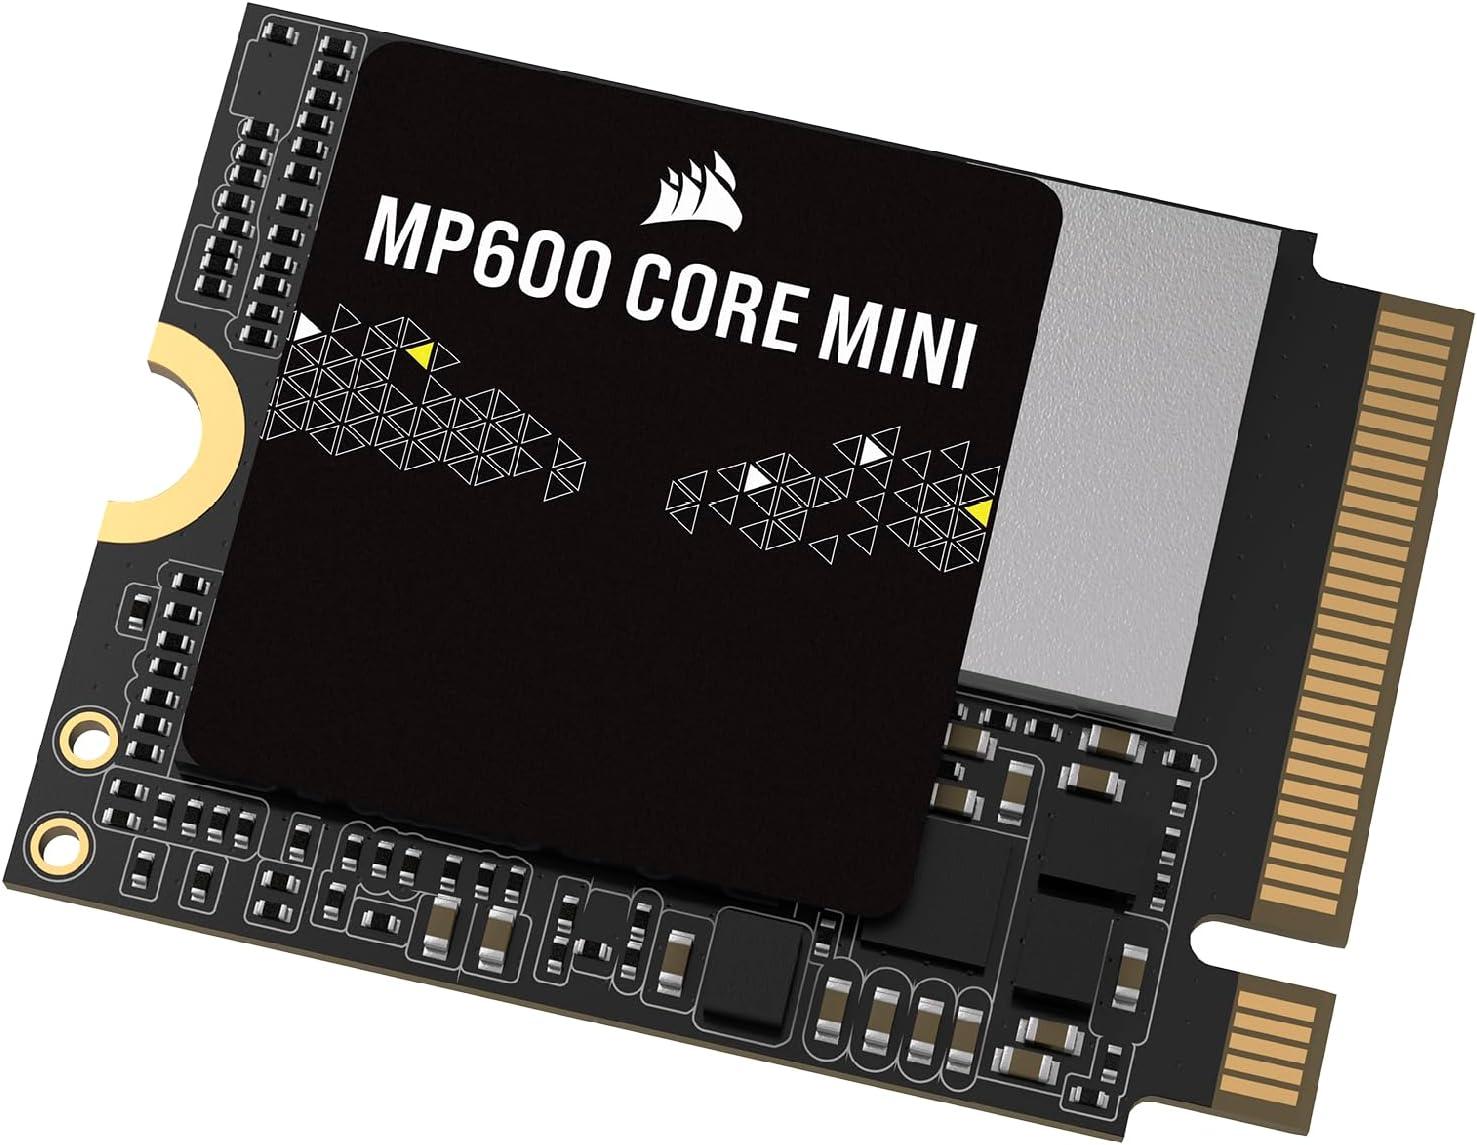 2TB Corsair MP600 CORE Mini M2 PCIe Gen 4 SSD Solid State Drive for $169.99 Shipped